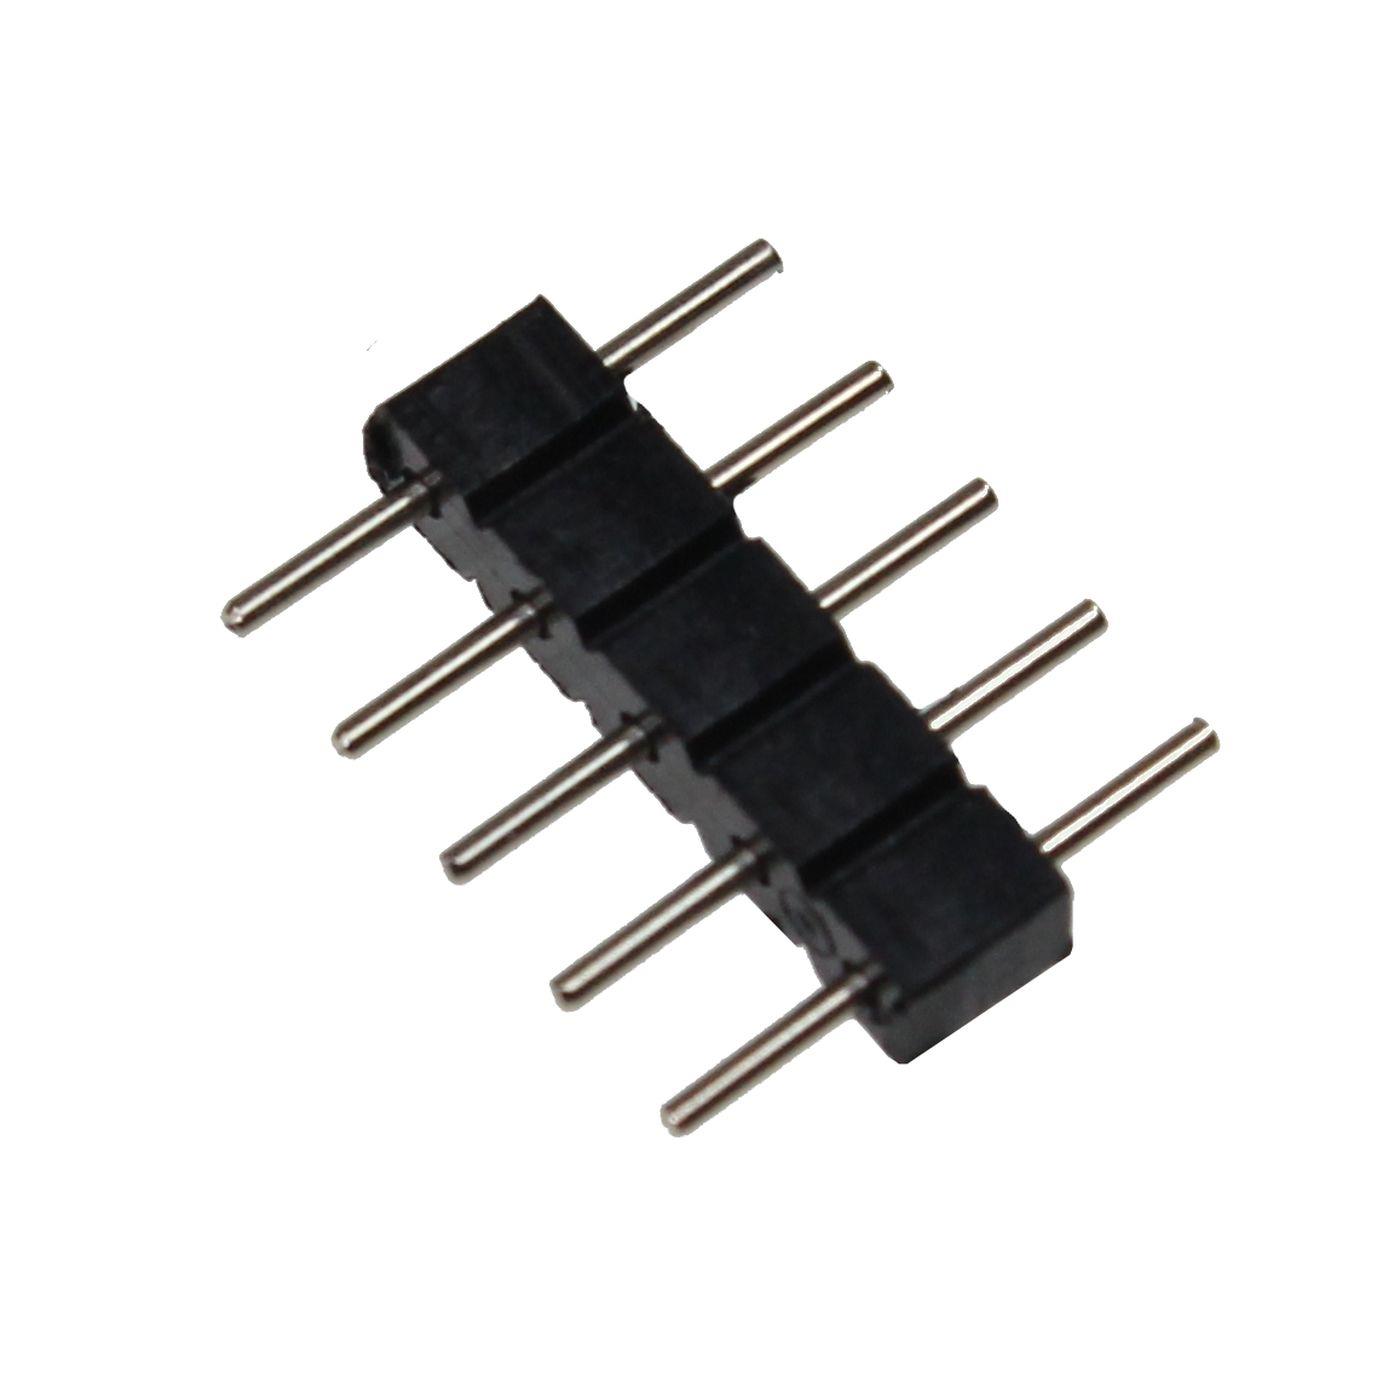 10x RGBW LED Jumper 5 Pin Connector 13x3mm Adapter Coupling